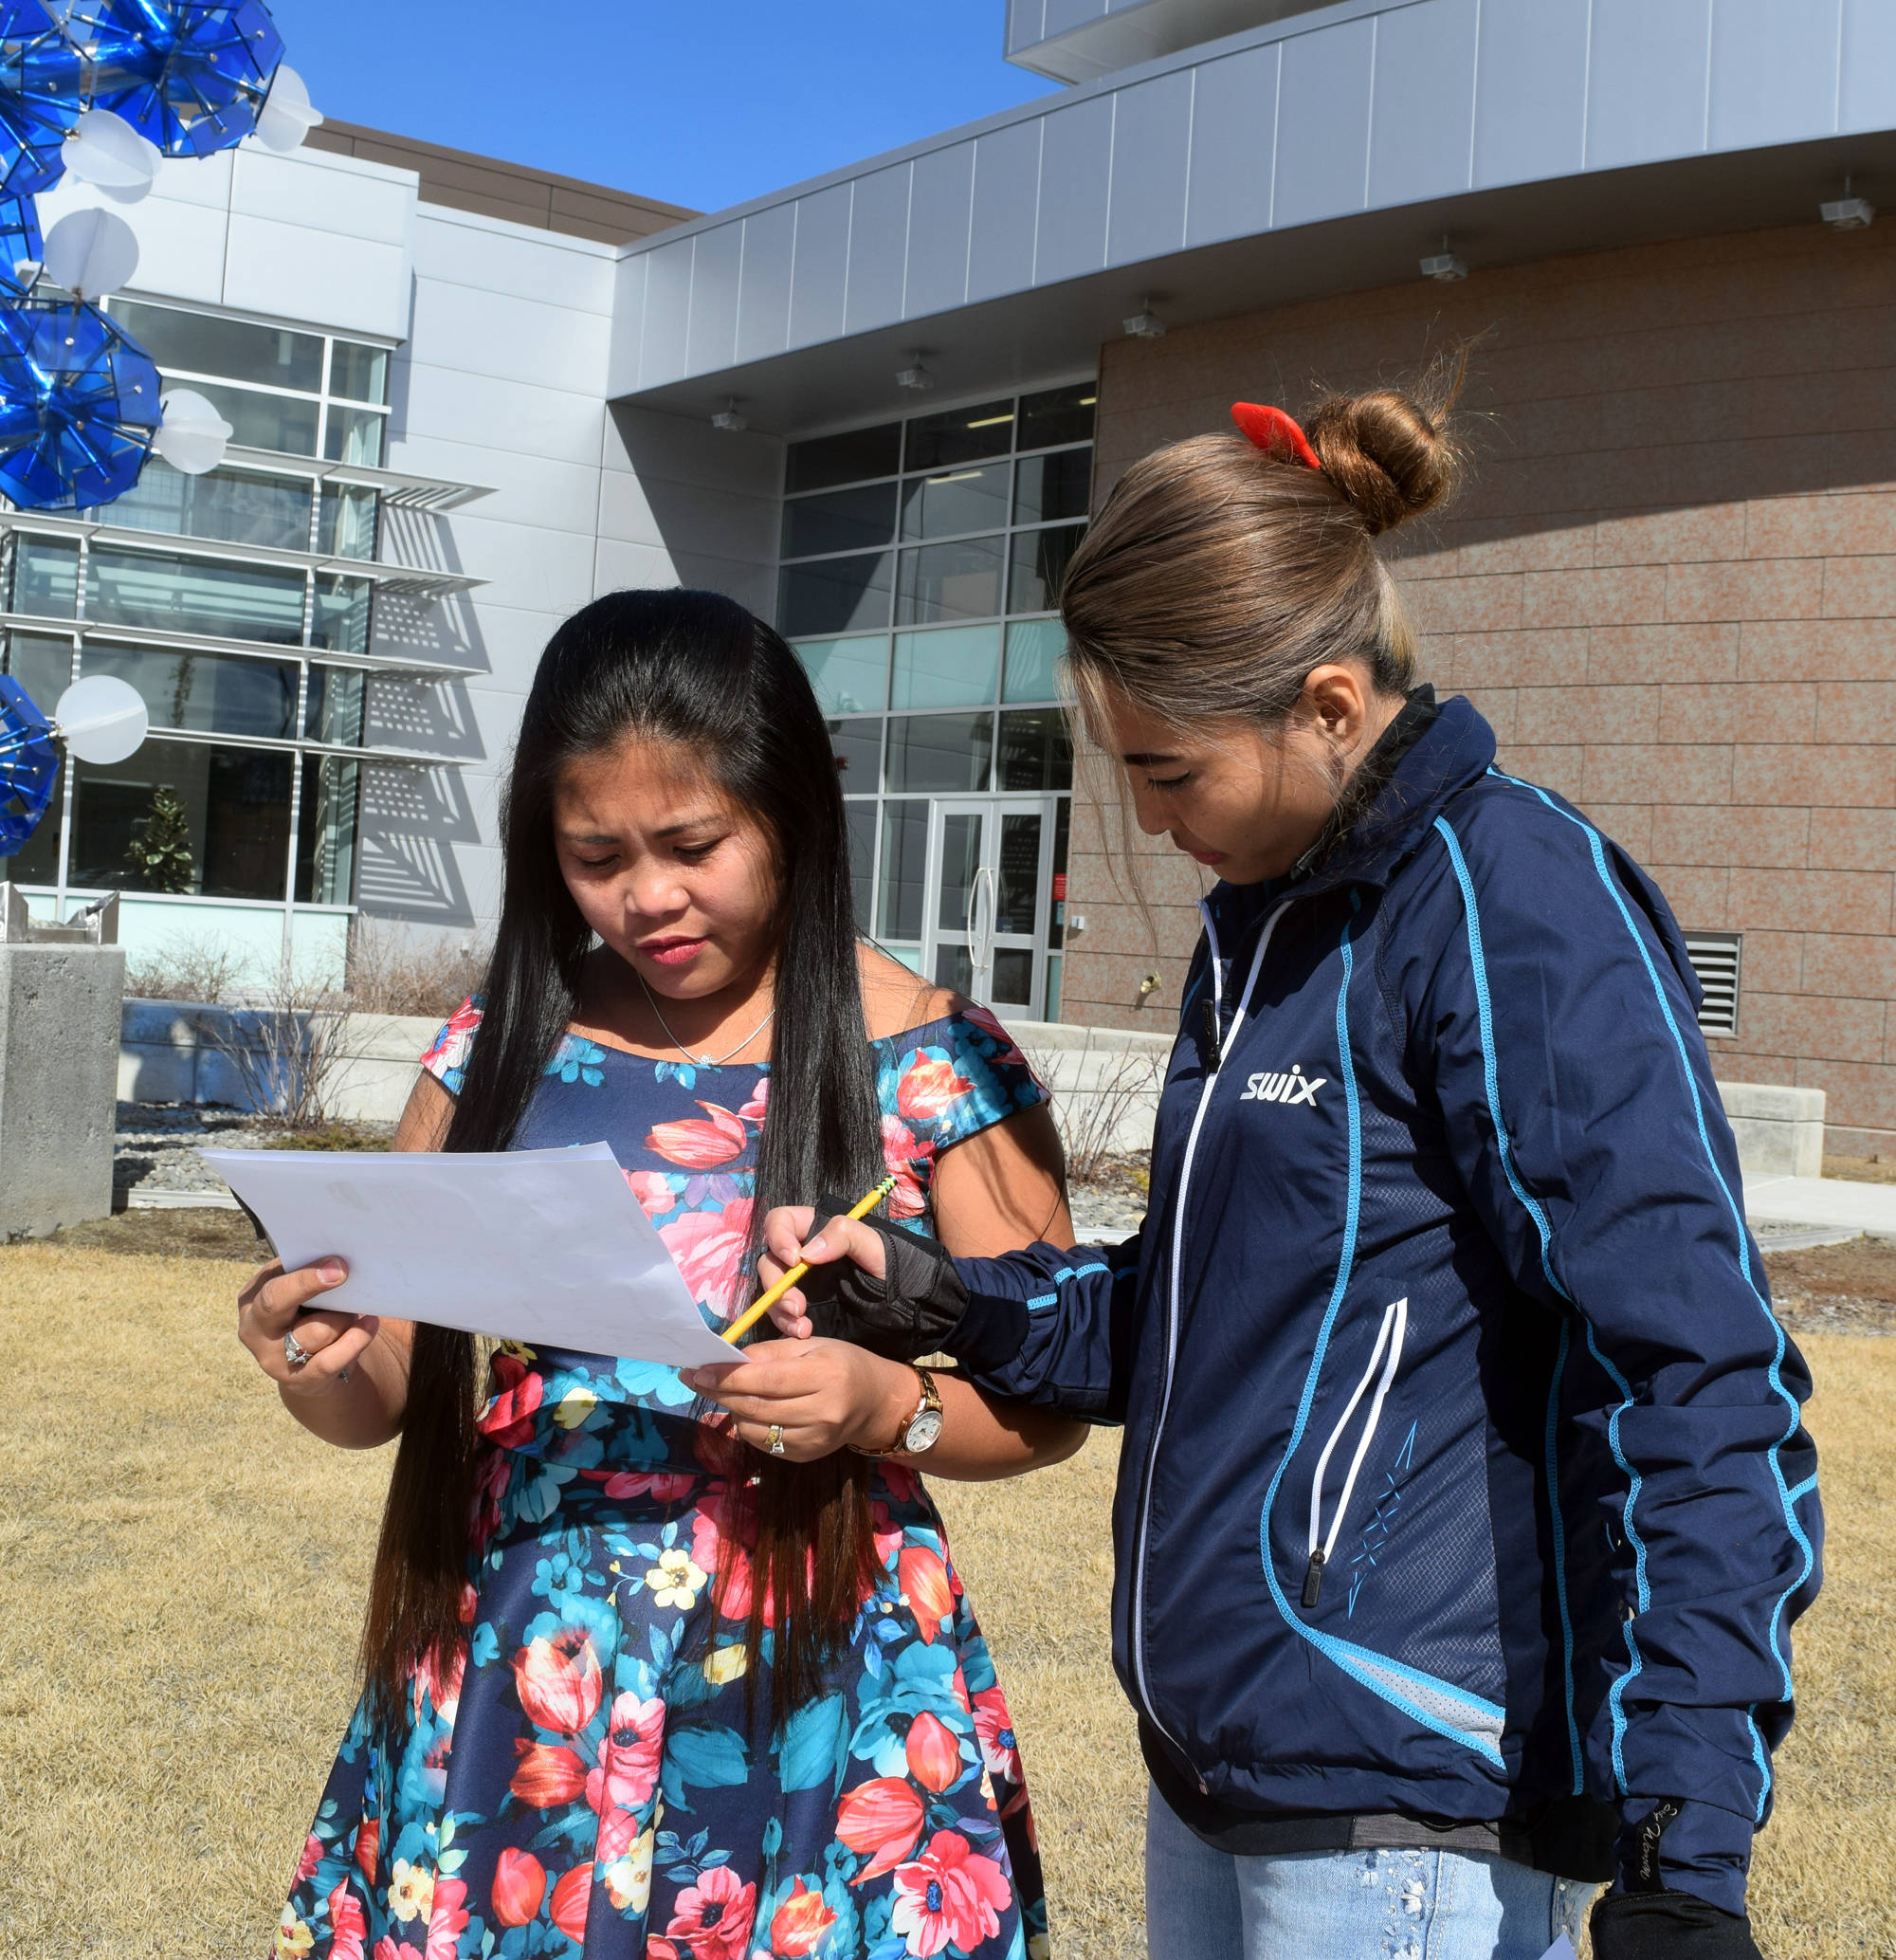 ABOVE: Mirasol O’Fallon, right, and Analyn Elliott participate in a scavenger hunt across the Kenai Peninsula College campus Thursday during their weekly English as a second language conversation group. (Photo by Kat Sorensen/Peninsula Clarion)